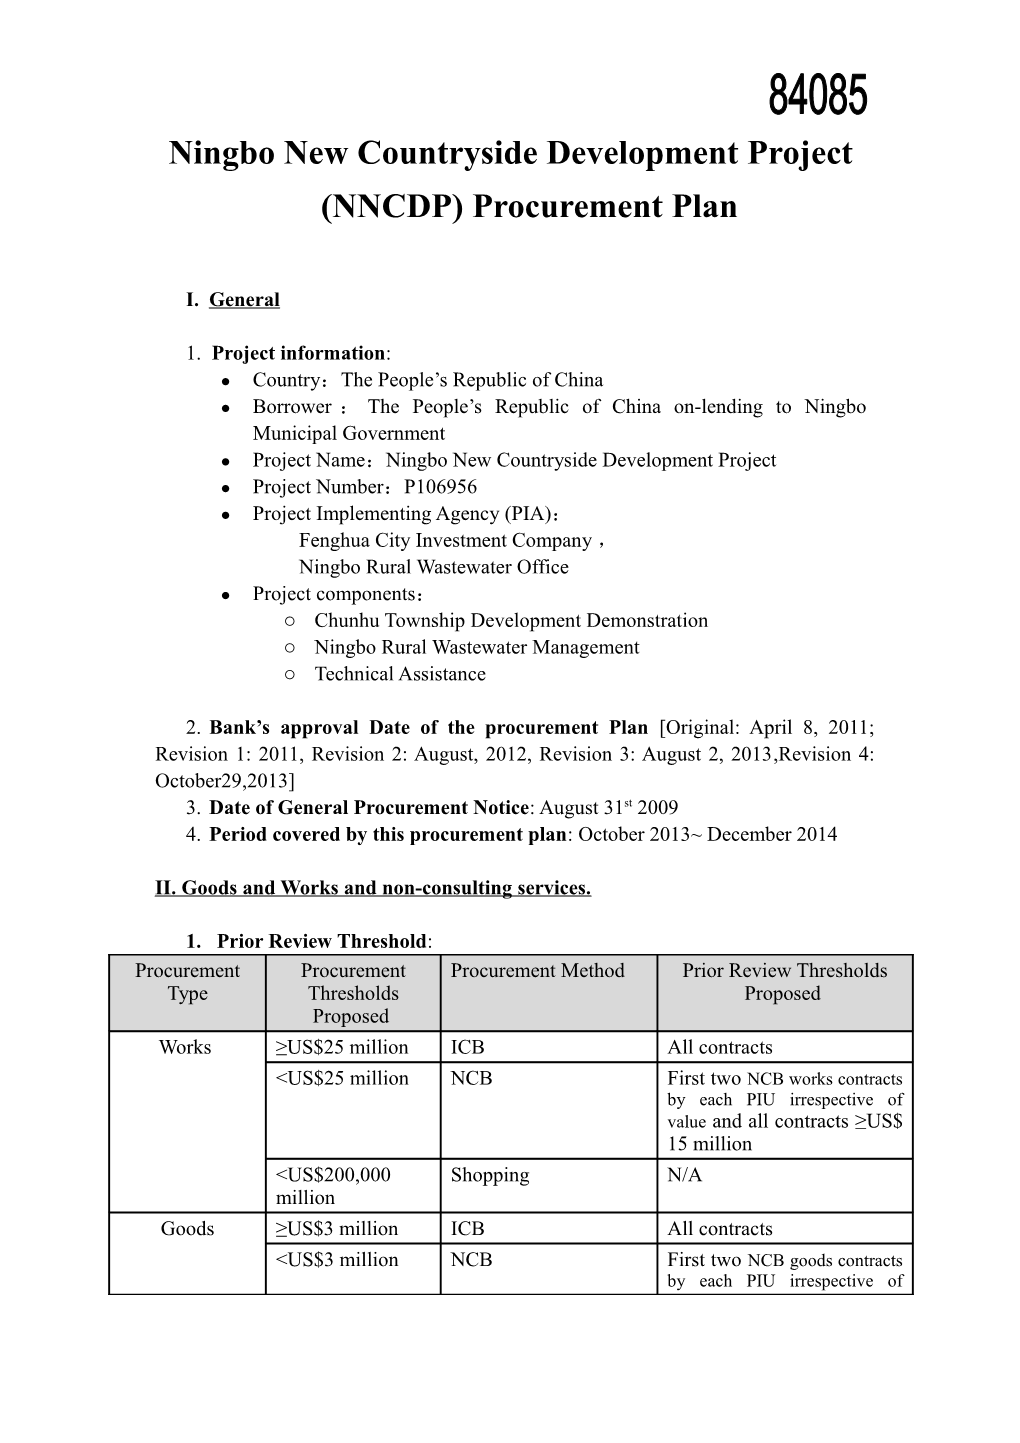 Updated Procurement Plan for Ningbo Rural Wastewater Treatment Project (2012)